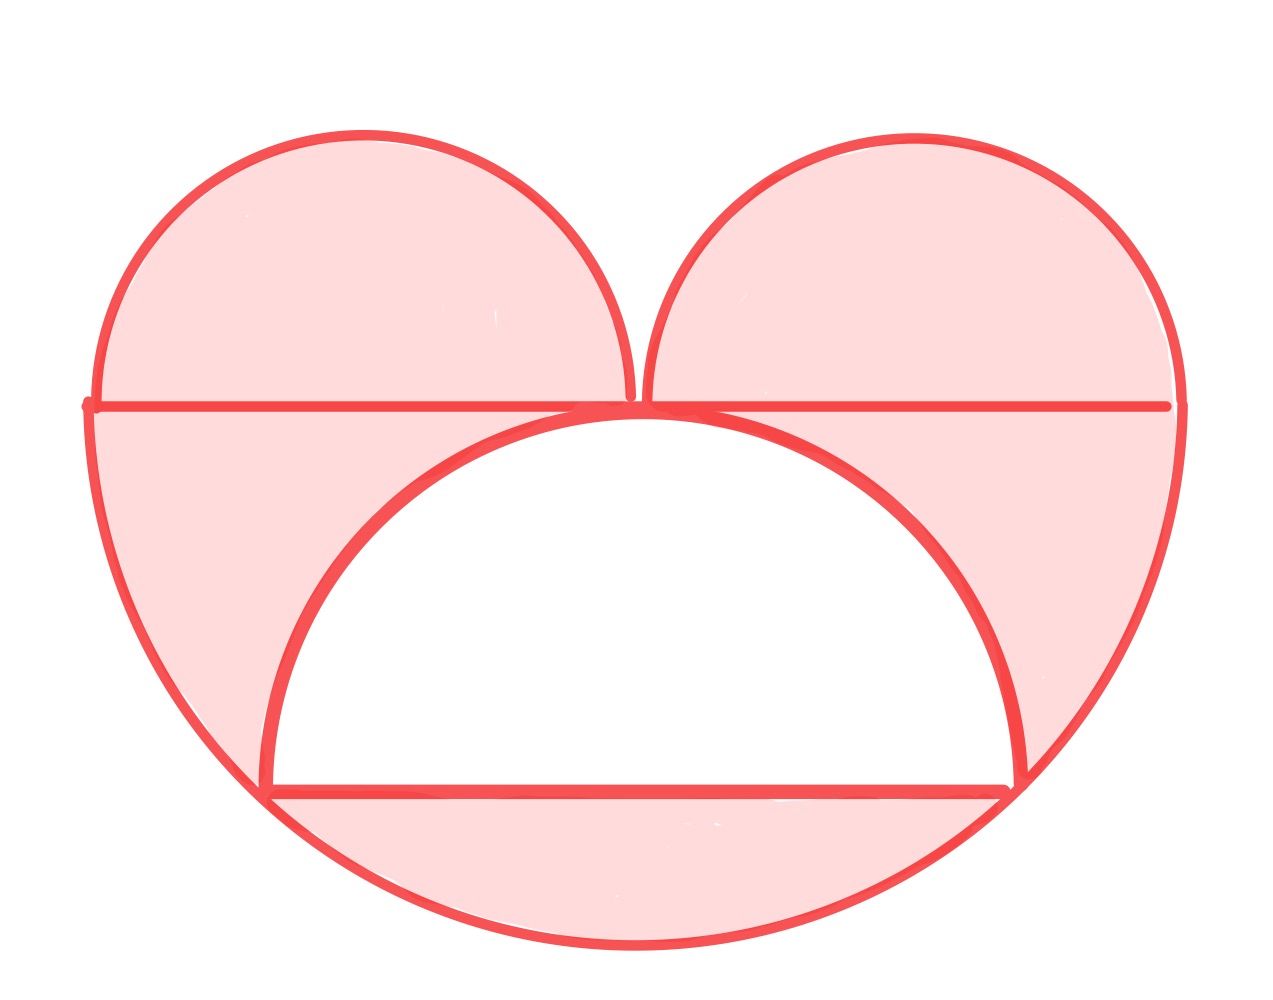 Four parallel semi-circles special A